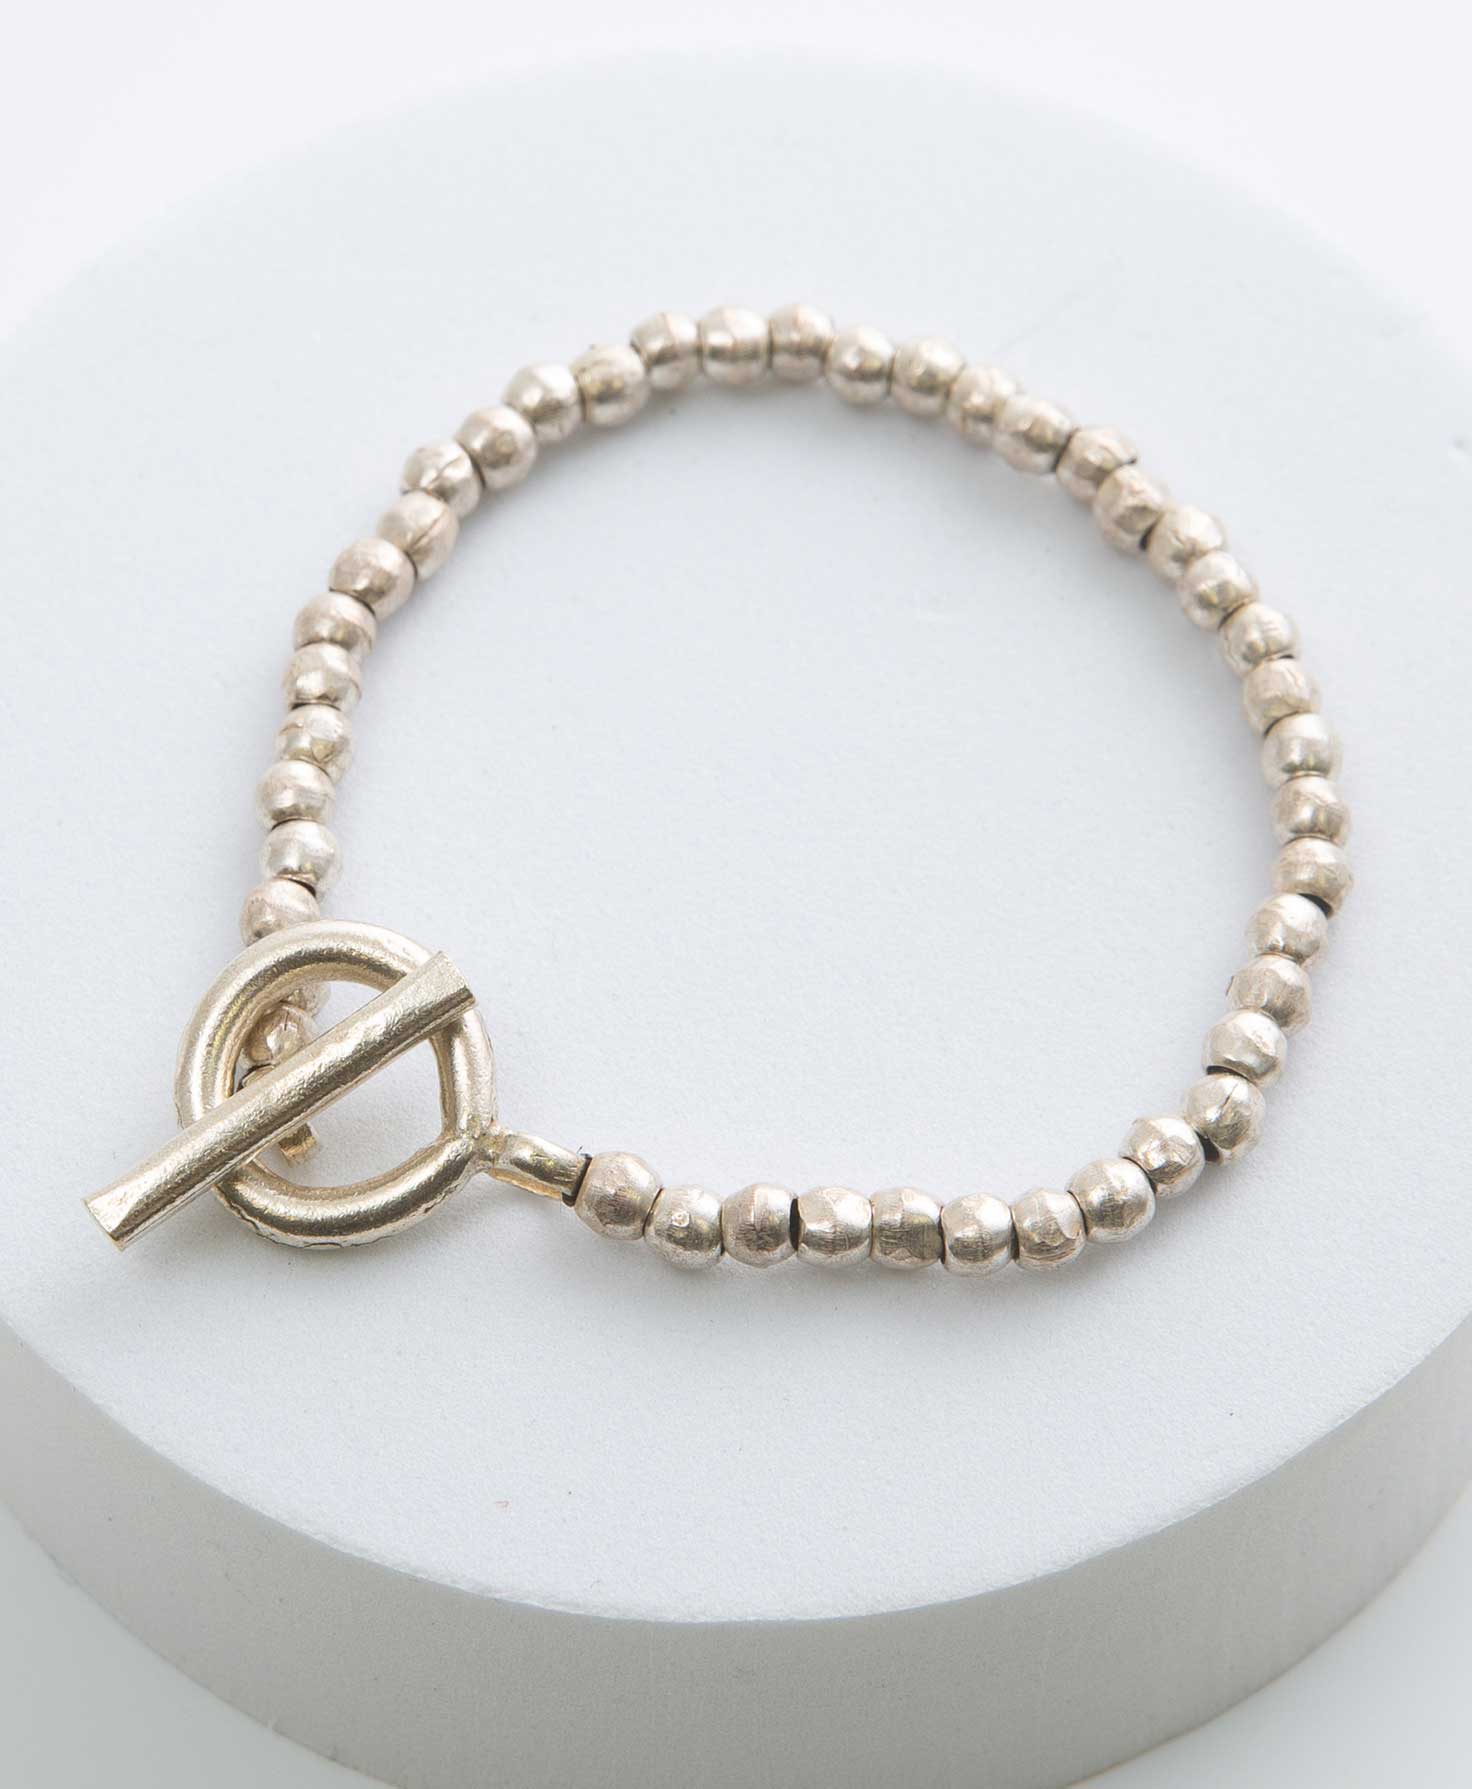 The Pristine Bracelet is clasped and sits on a white block. It is made of a single strand of round, silver beads with slightly irregular textures for a handmade look. The toggle clasp is also a design feature, and consists of a silver bar that rests within a silver loop.